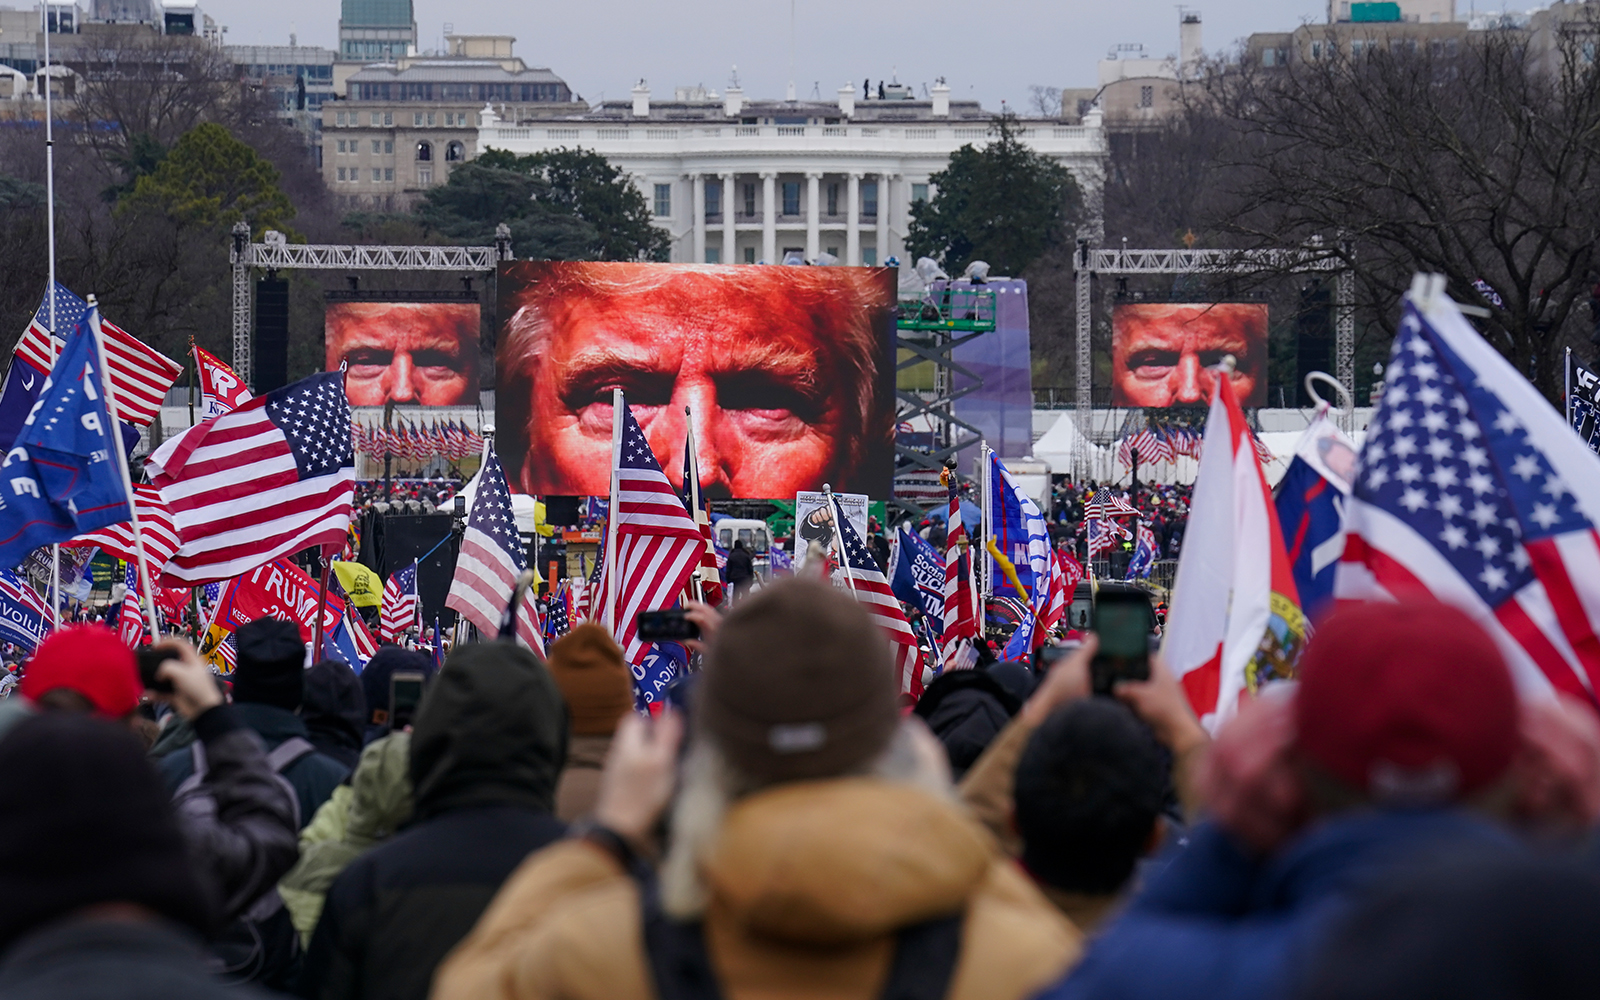 Trump supporters at a rally before an assault on the US Capitol, Washington, January 6, 2021. (AP Photo/John Minchillo)